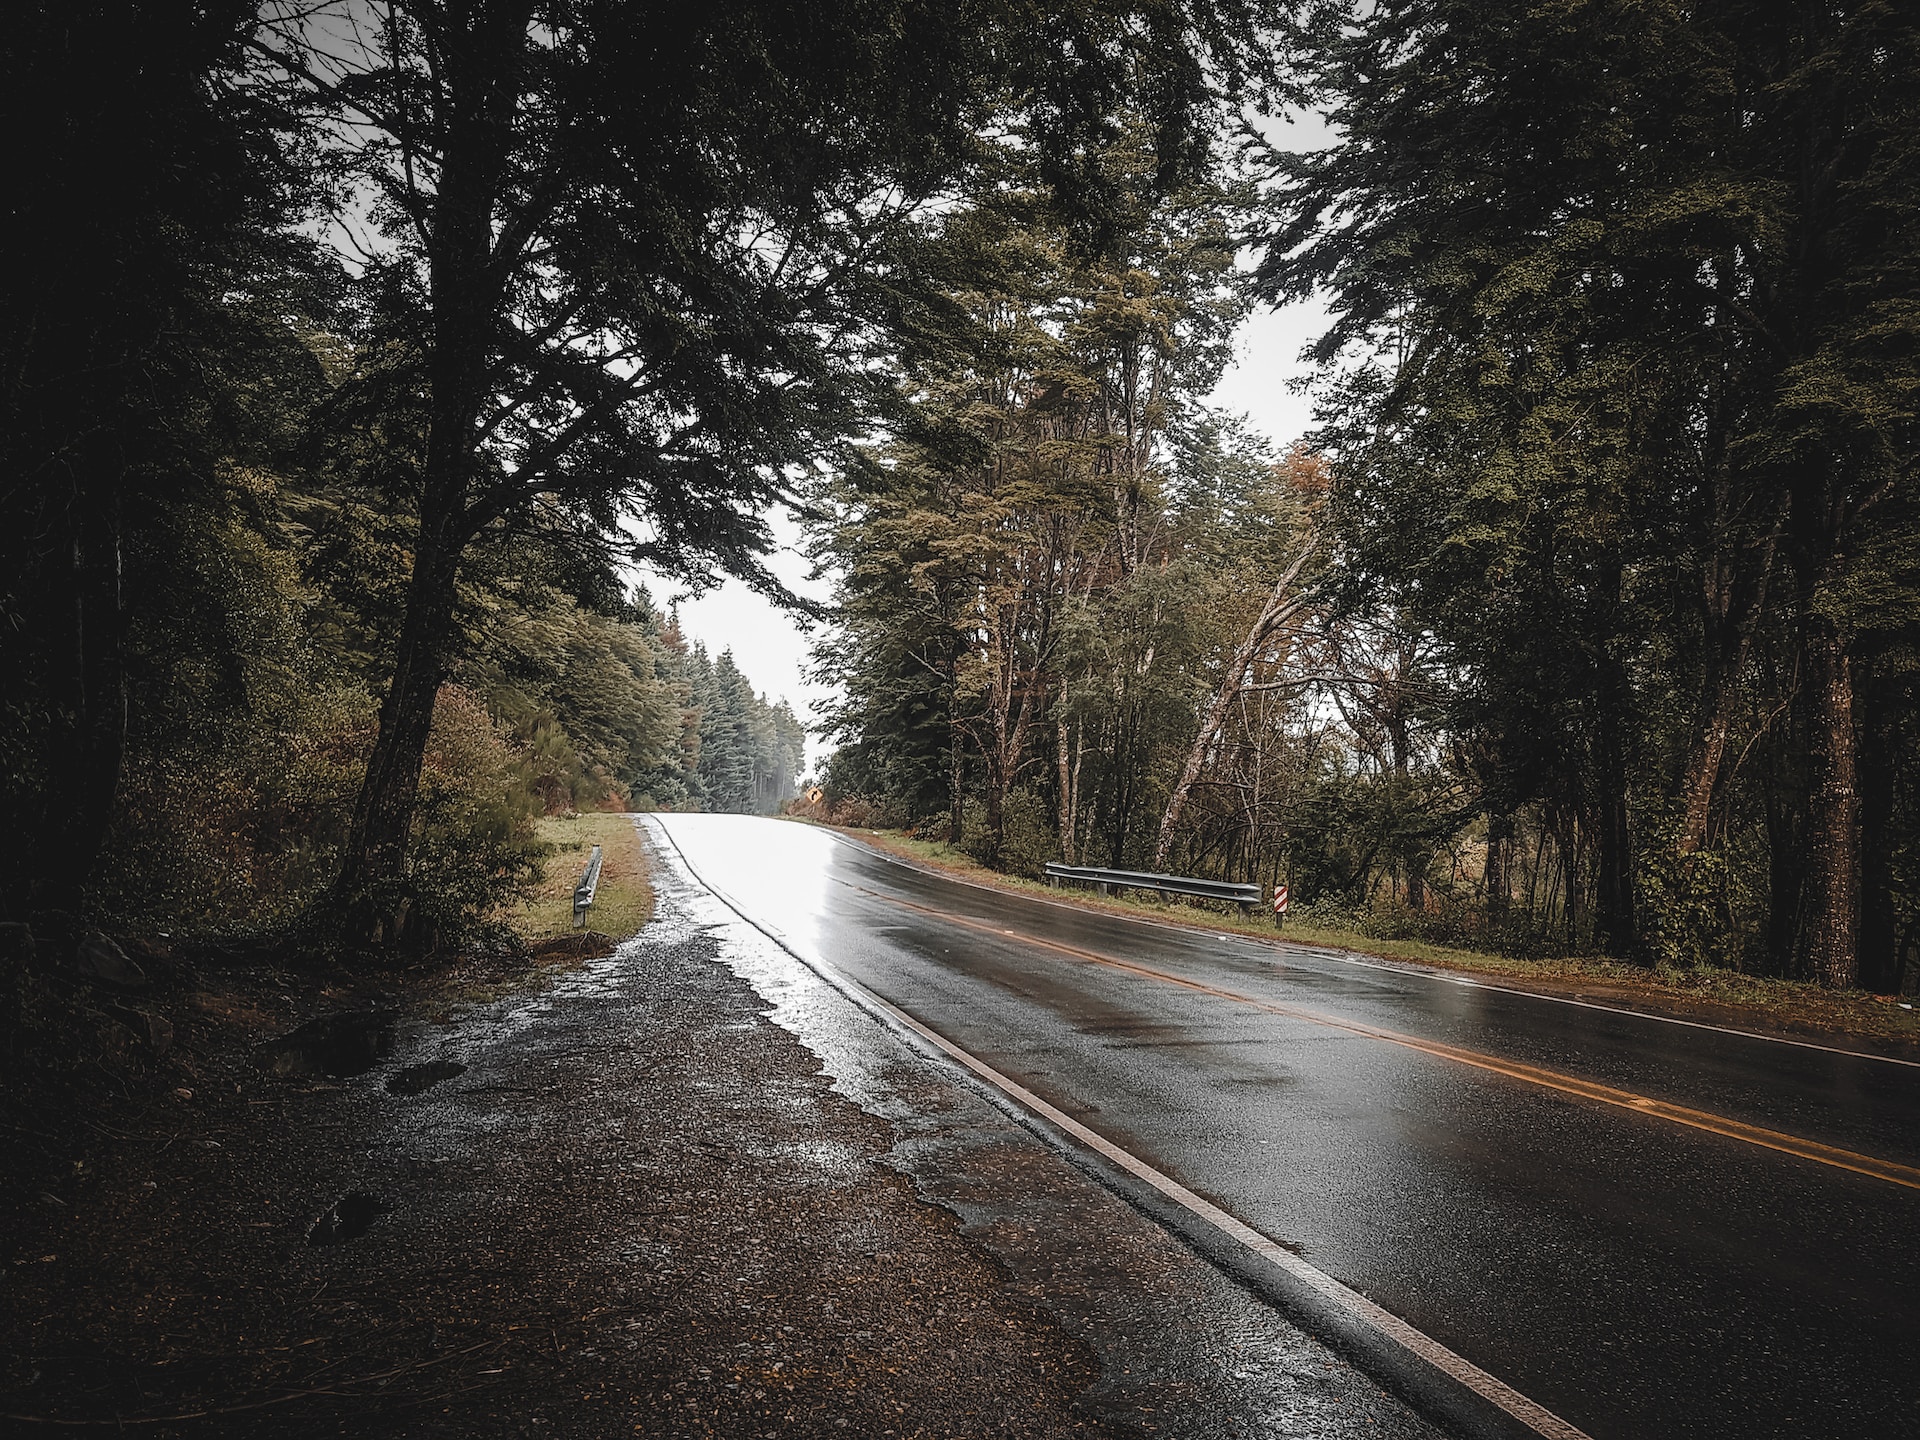 A wet country road